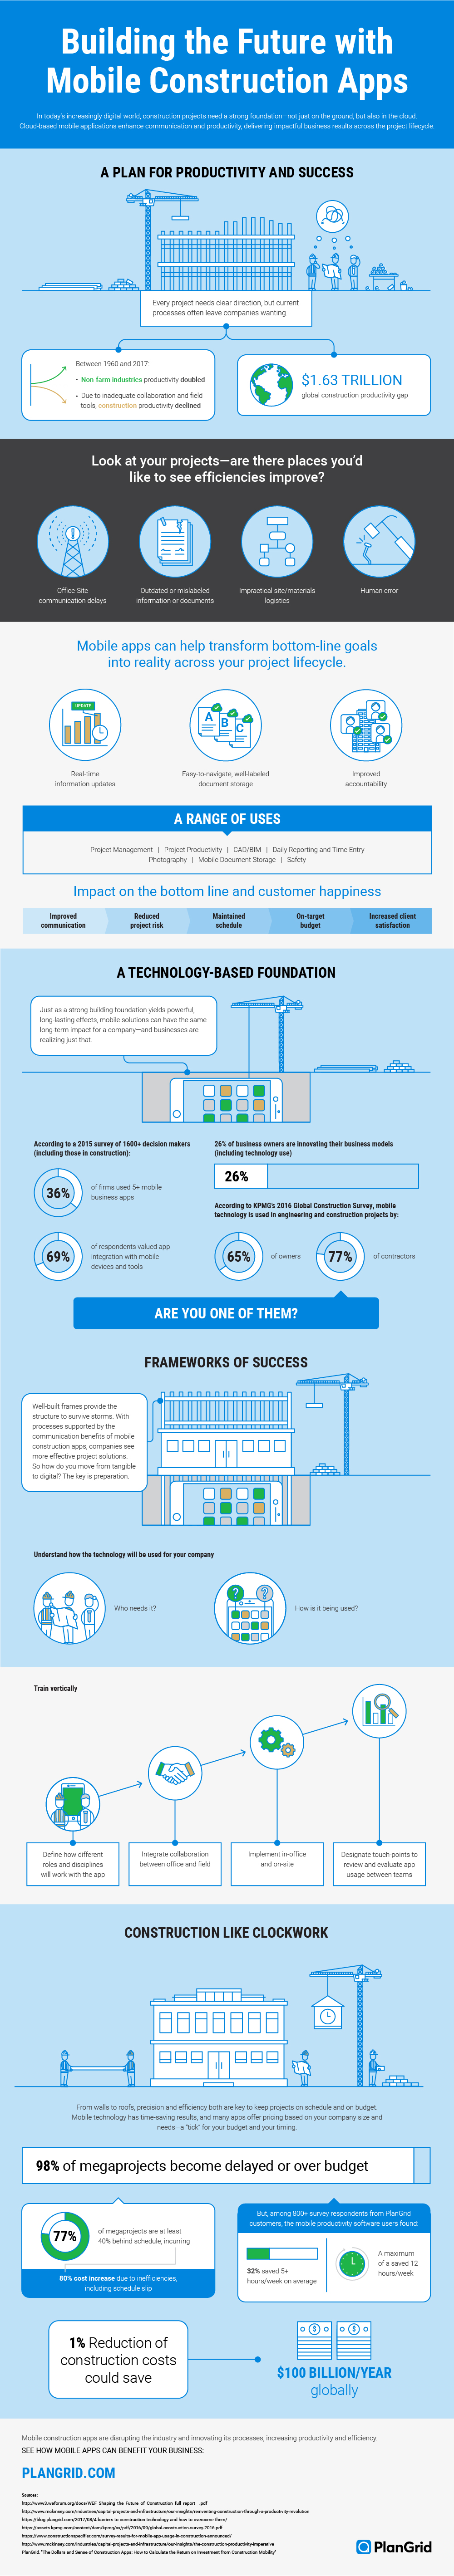 Building the Future with Mobile Construction Apps [infographic]